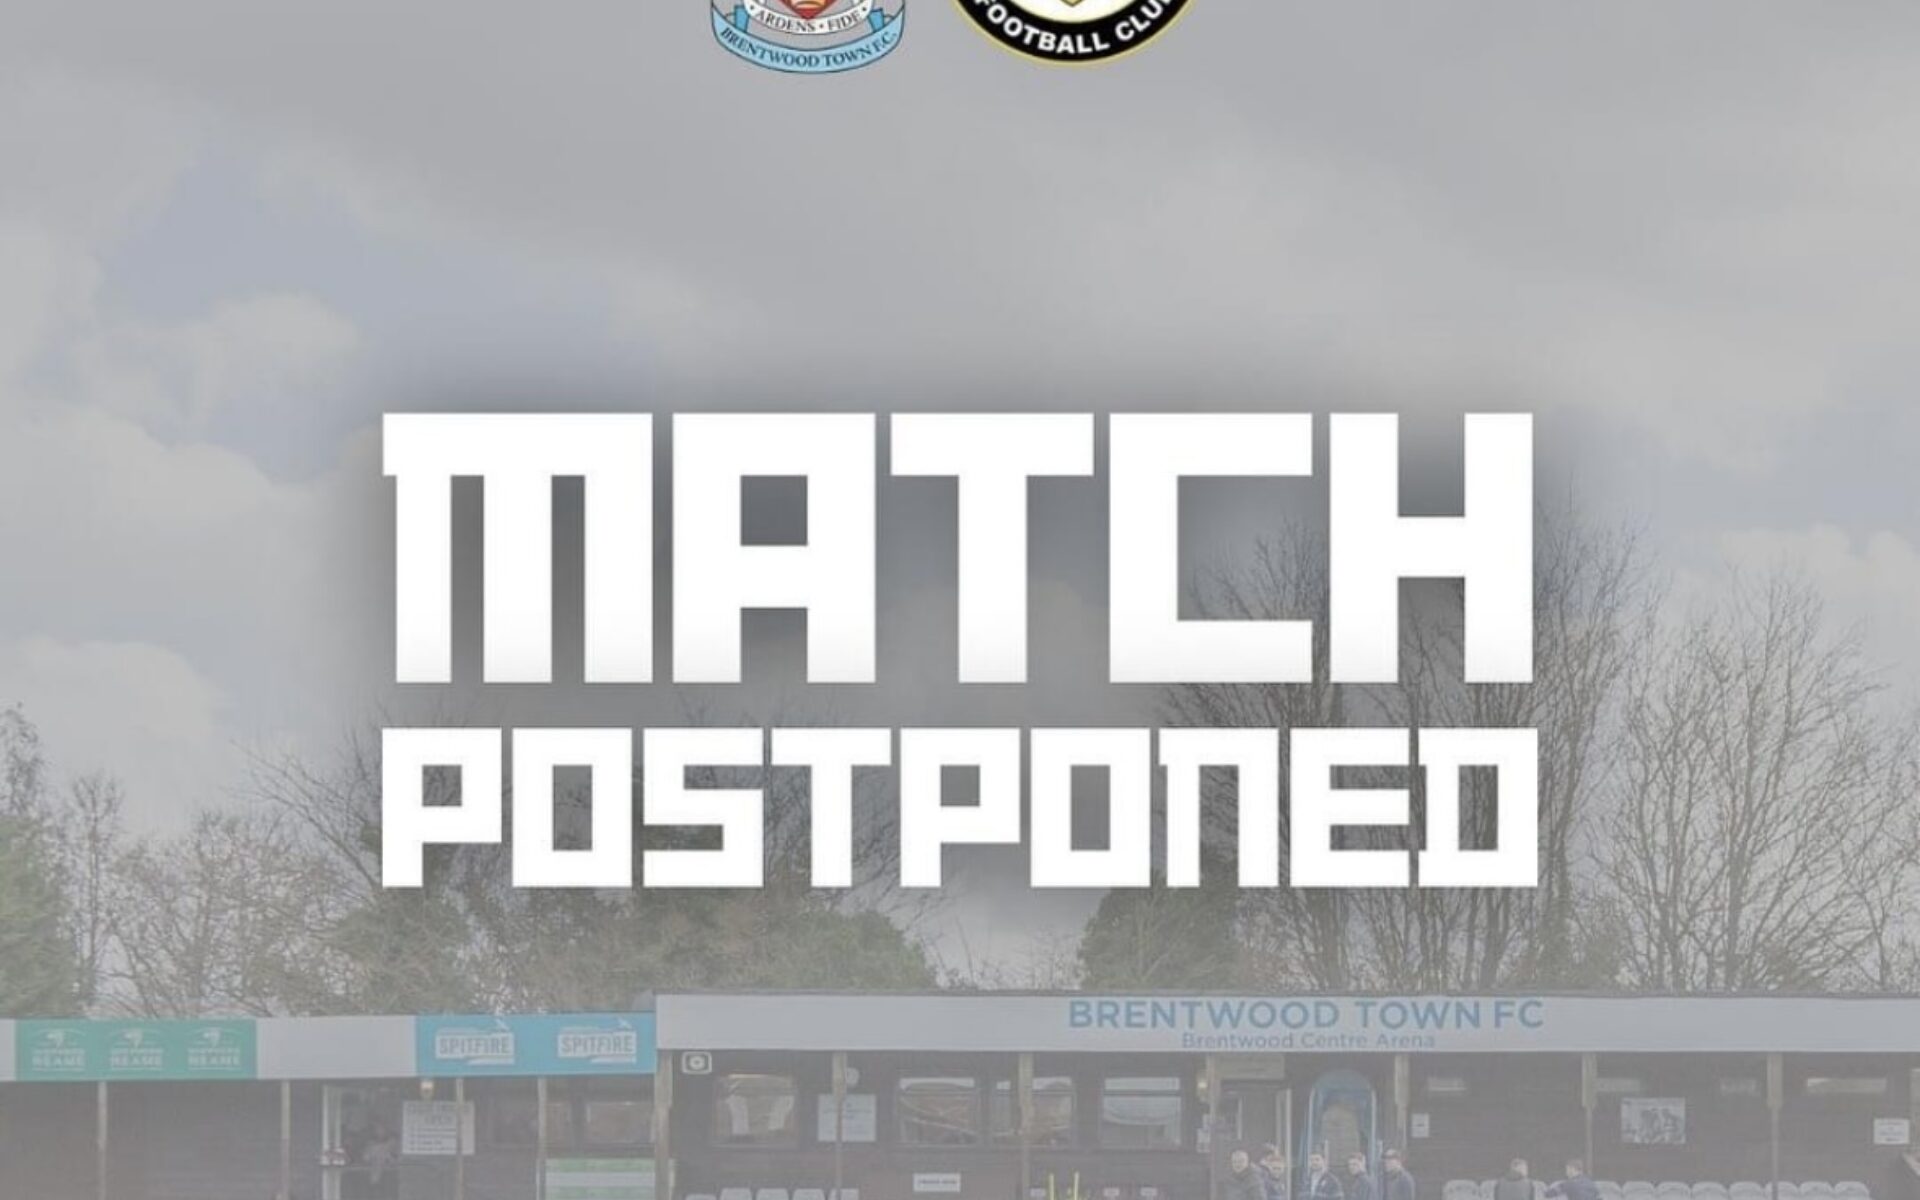 Brentwood Town v Stowmarket Town - Postponed Featured Image